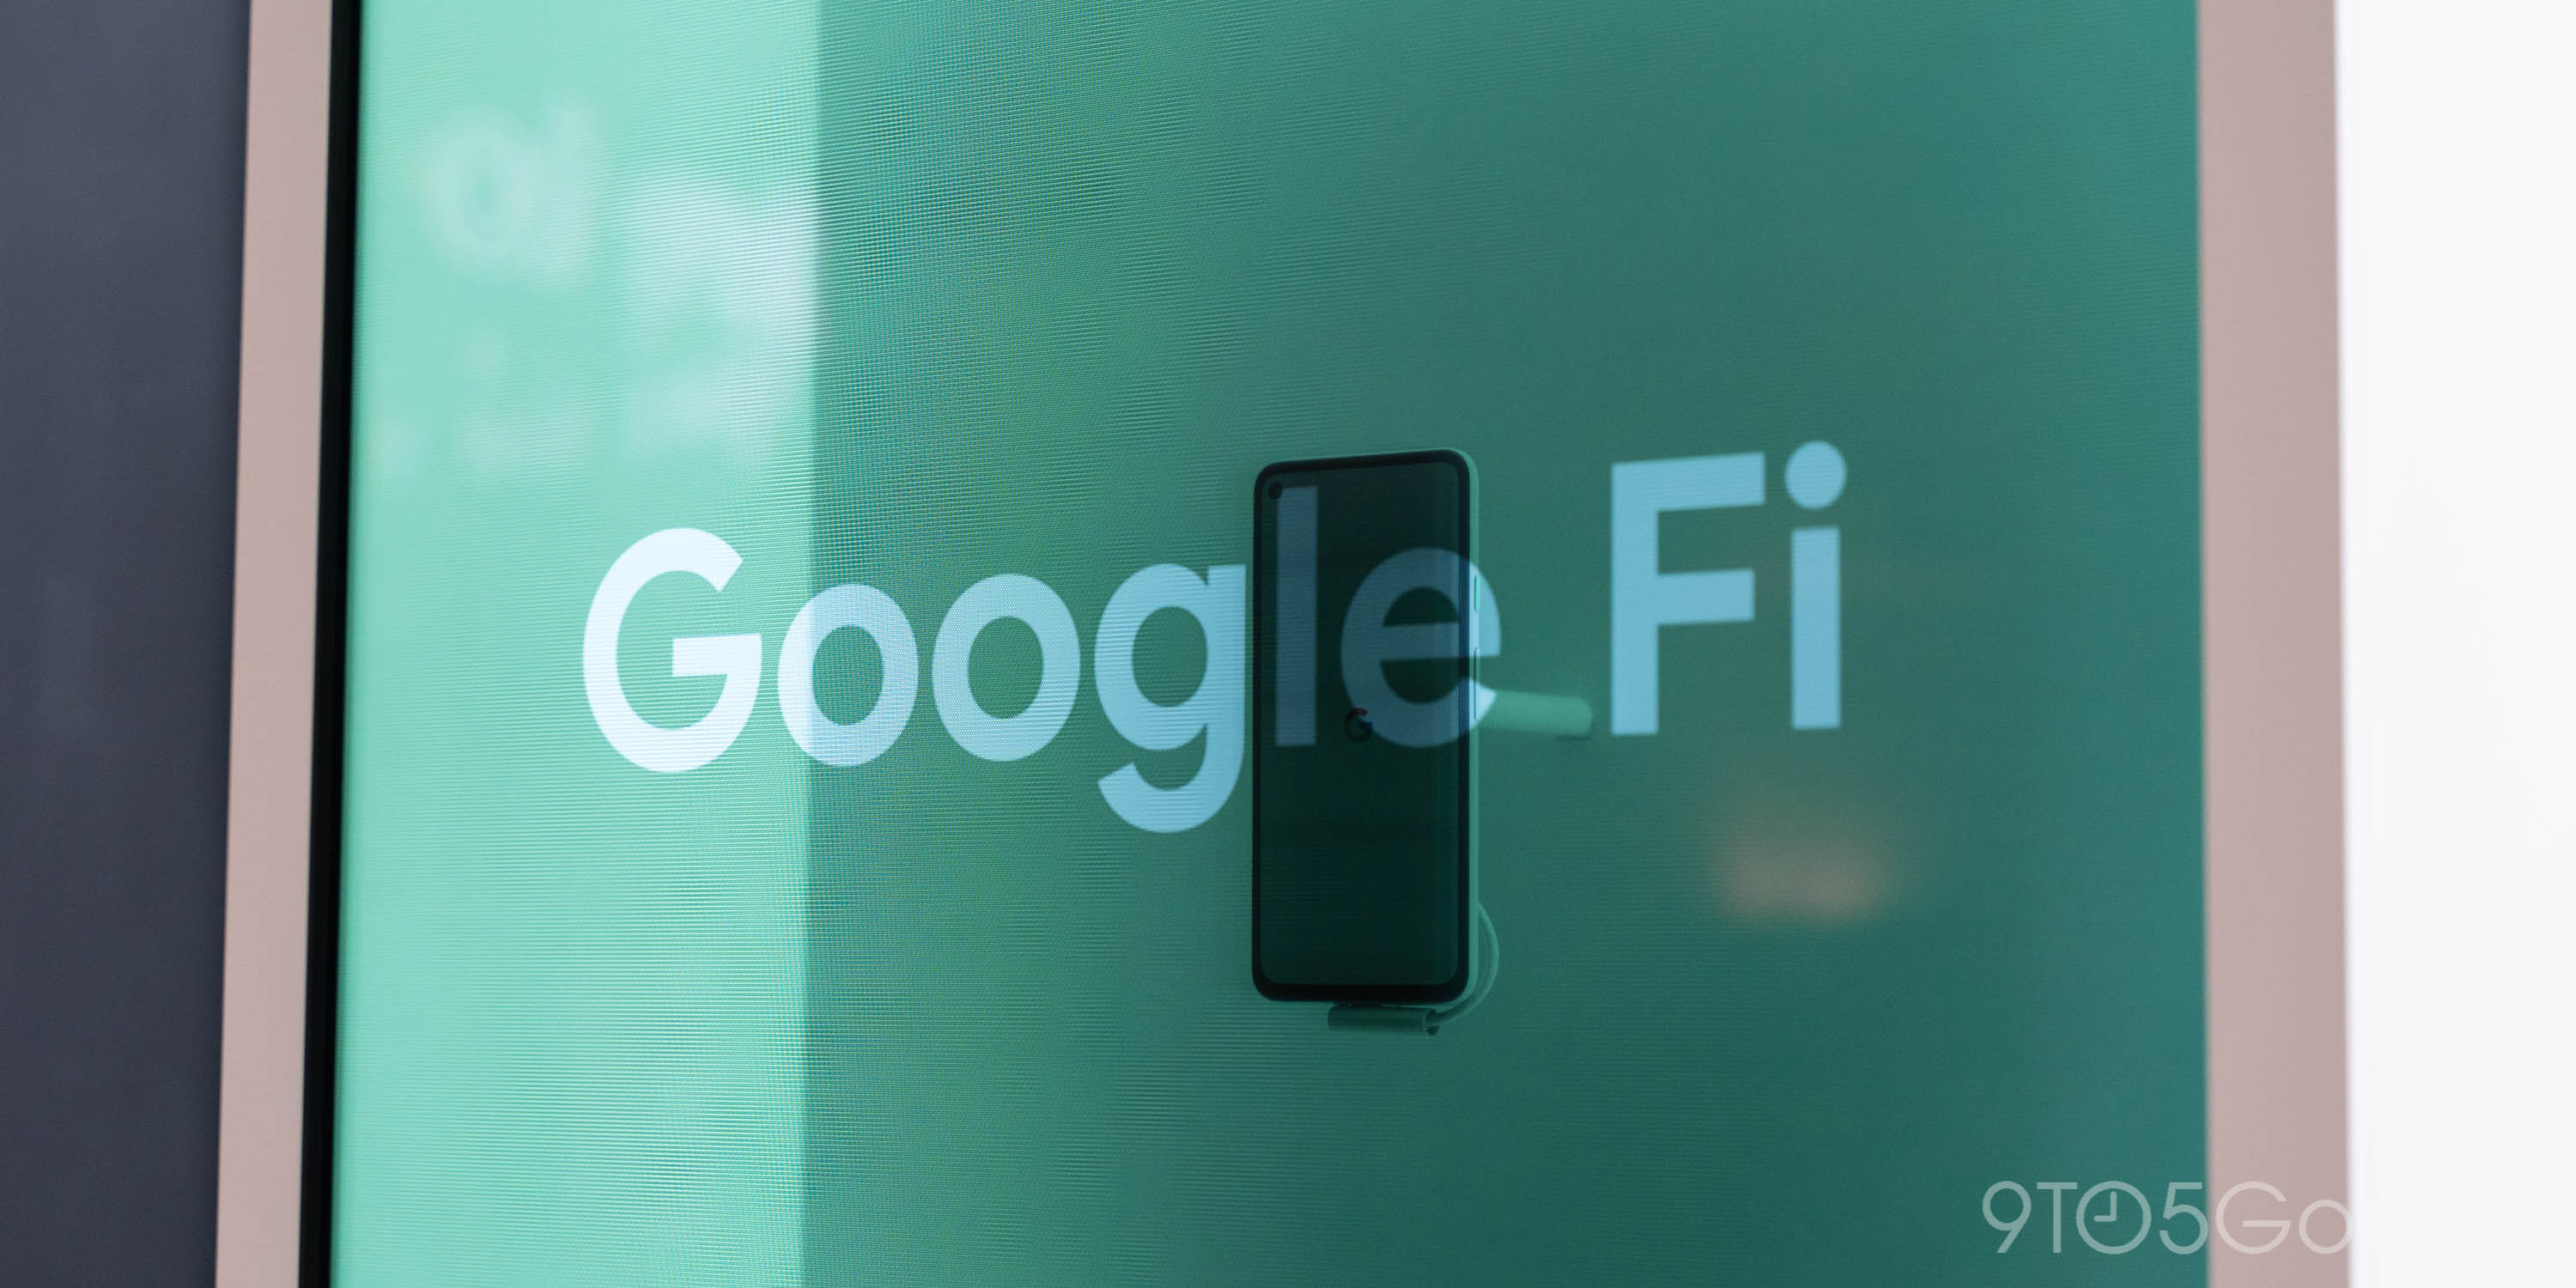 Google Fi now offers an unlimited plan for as low as $45 a month